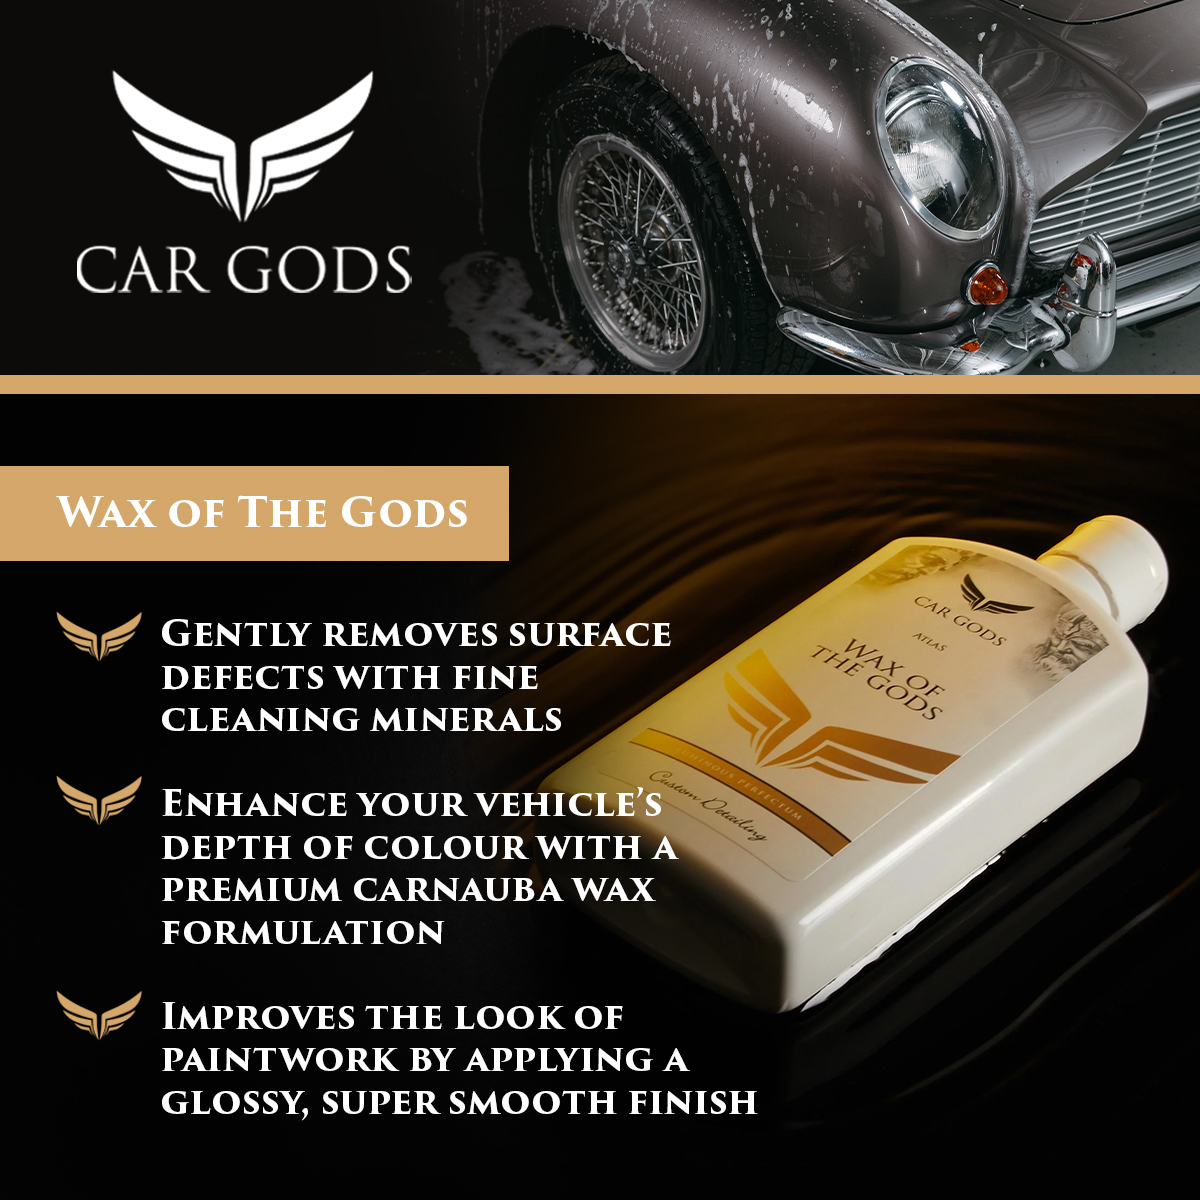 Car Gods Wax of The Gods. A Premium carnauba wax formulation with fine cleaning materials with to gently remove surface defects. Blesses your vehicle with a glossy, super smooth, hydrophobic and resilient paintwork protective coating.